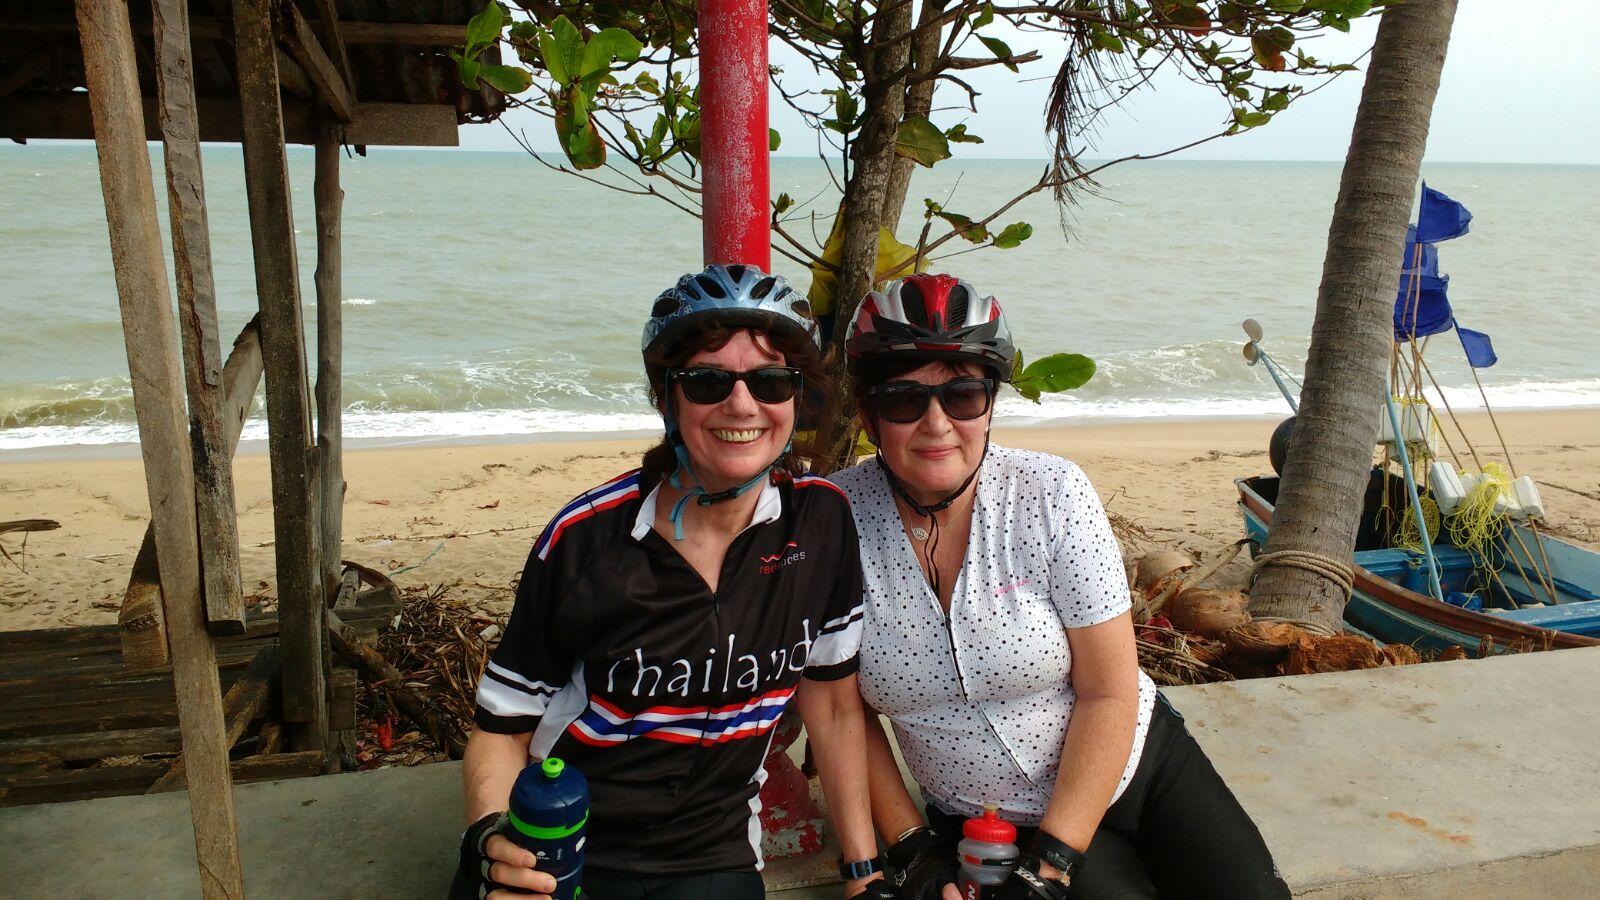 Photos from our South Thailand Cycling Holiday